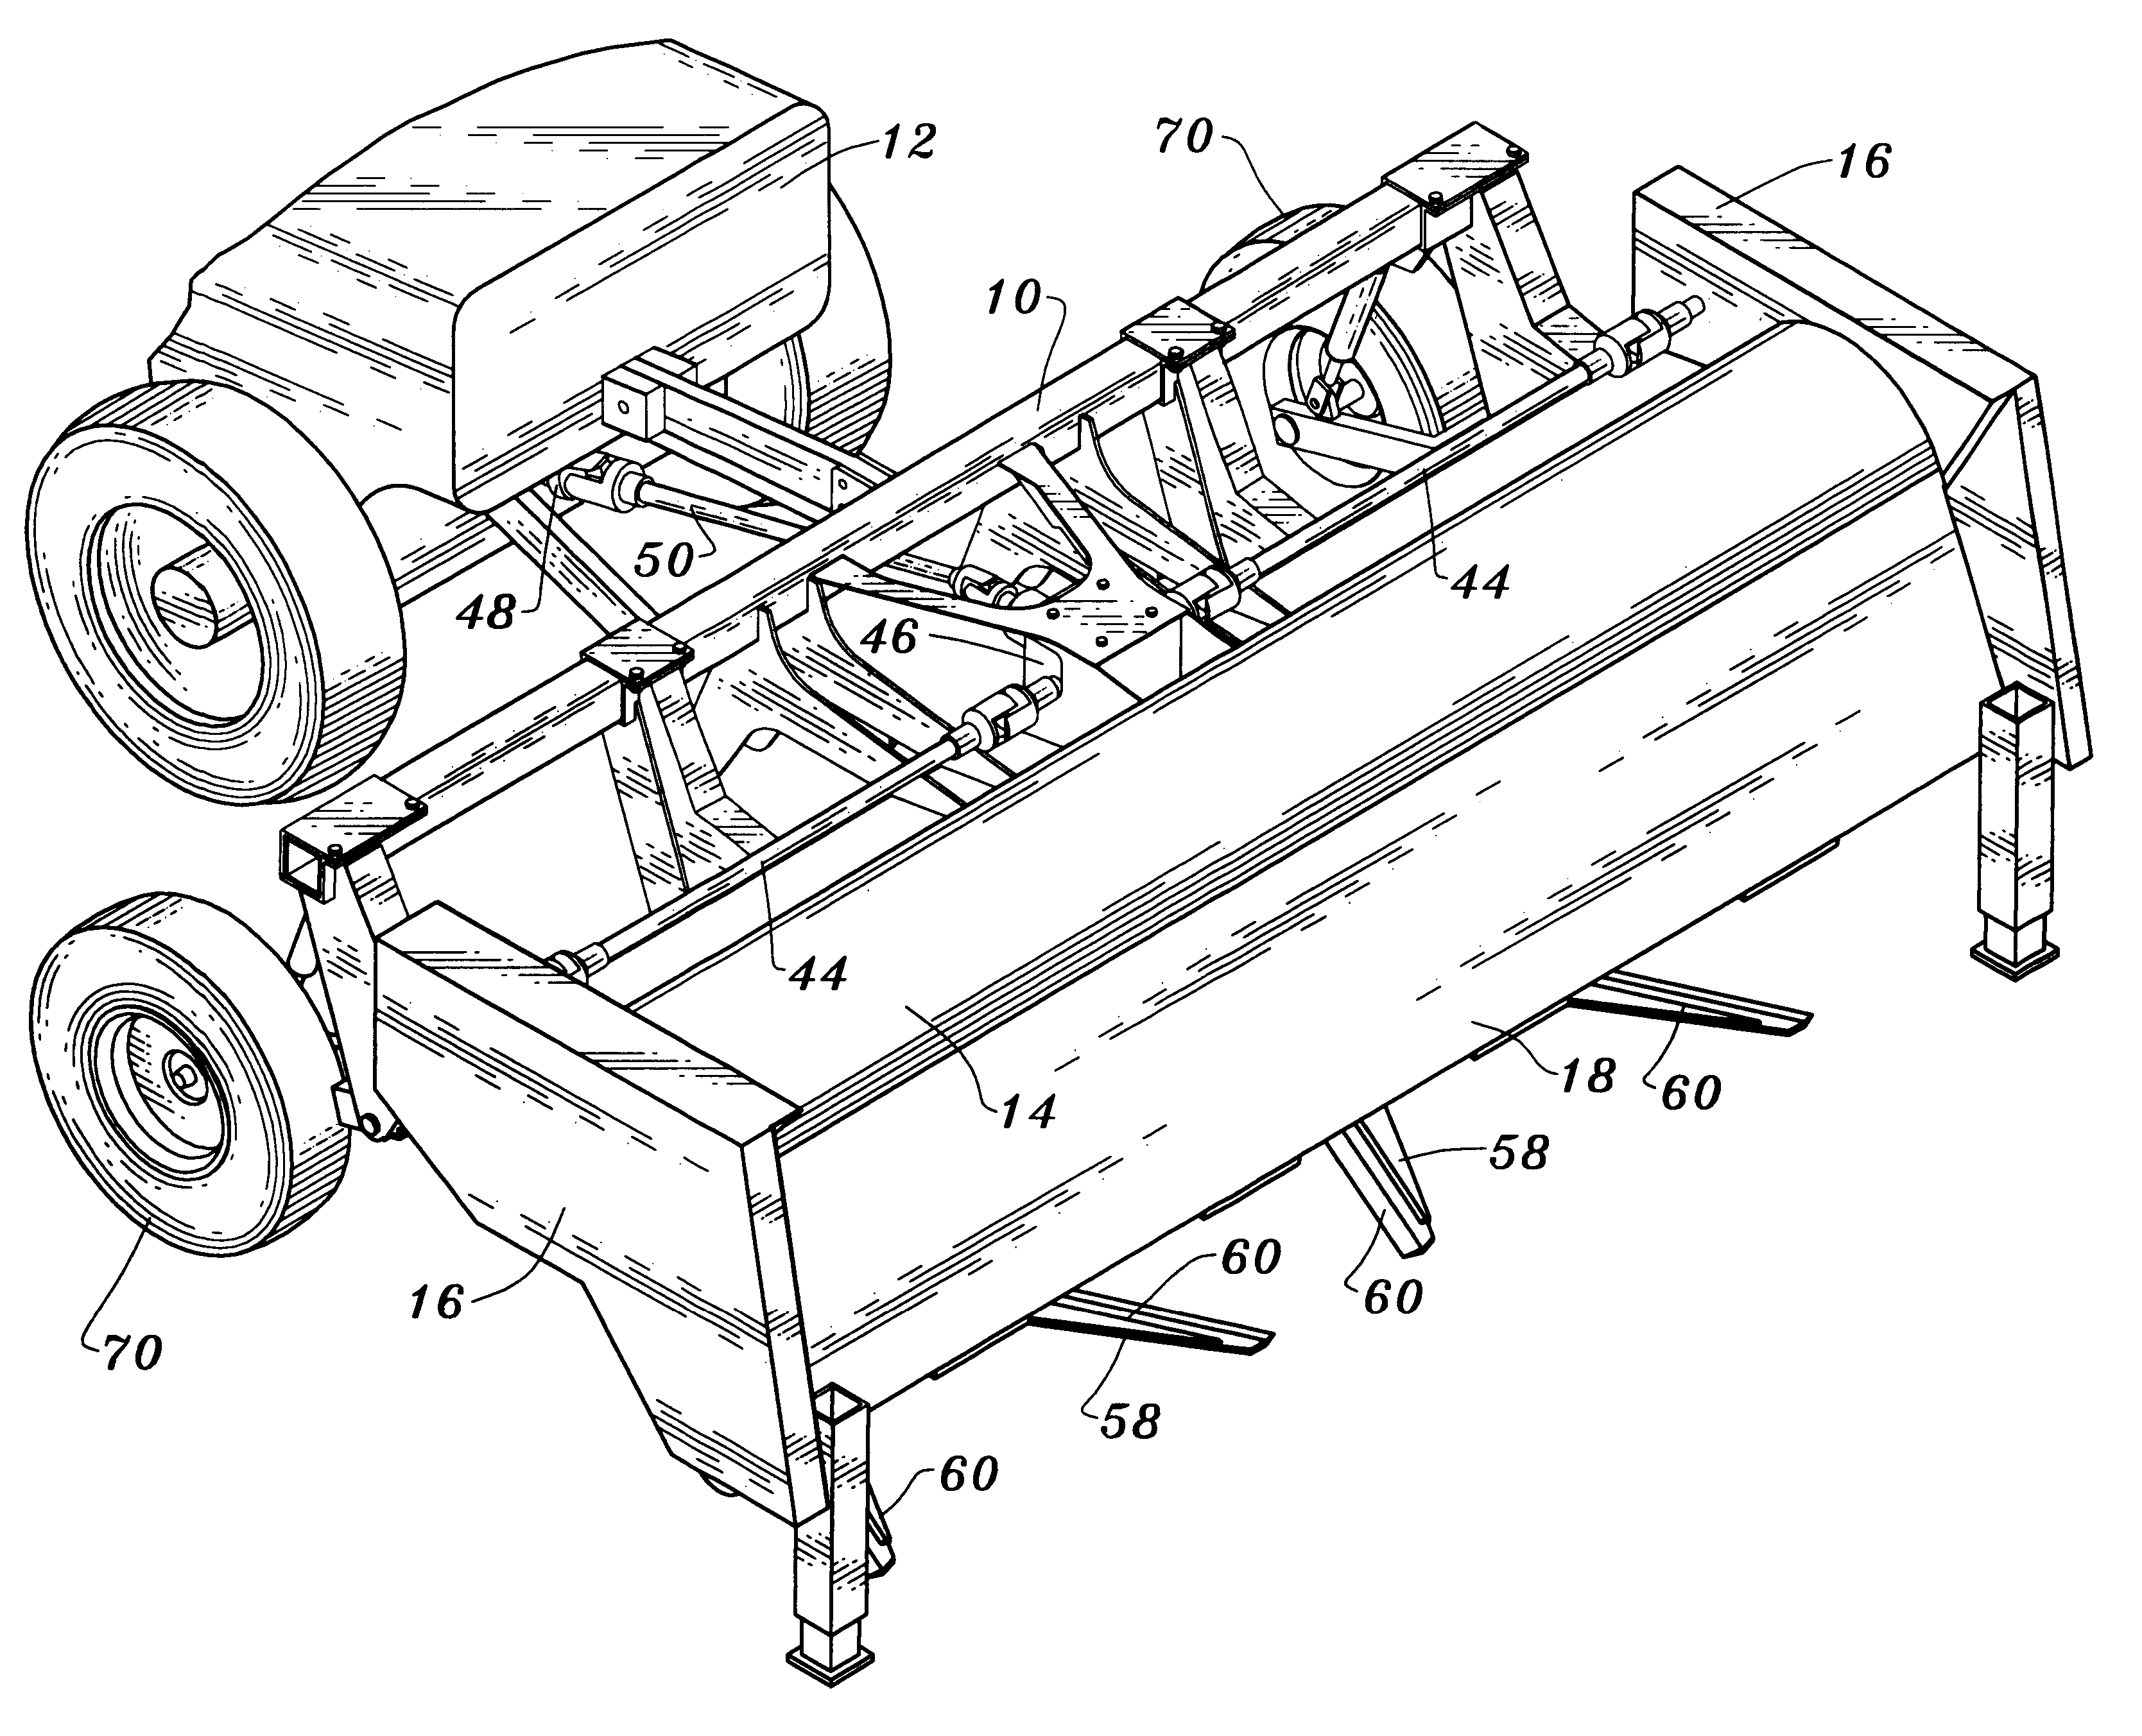 Apparatus and method for removing plant stalks from a field and shredding the plant stalks